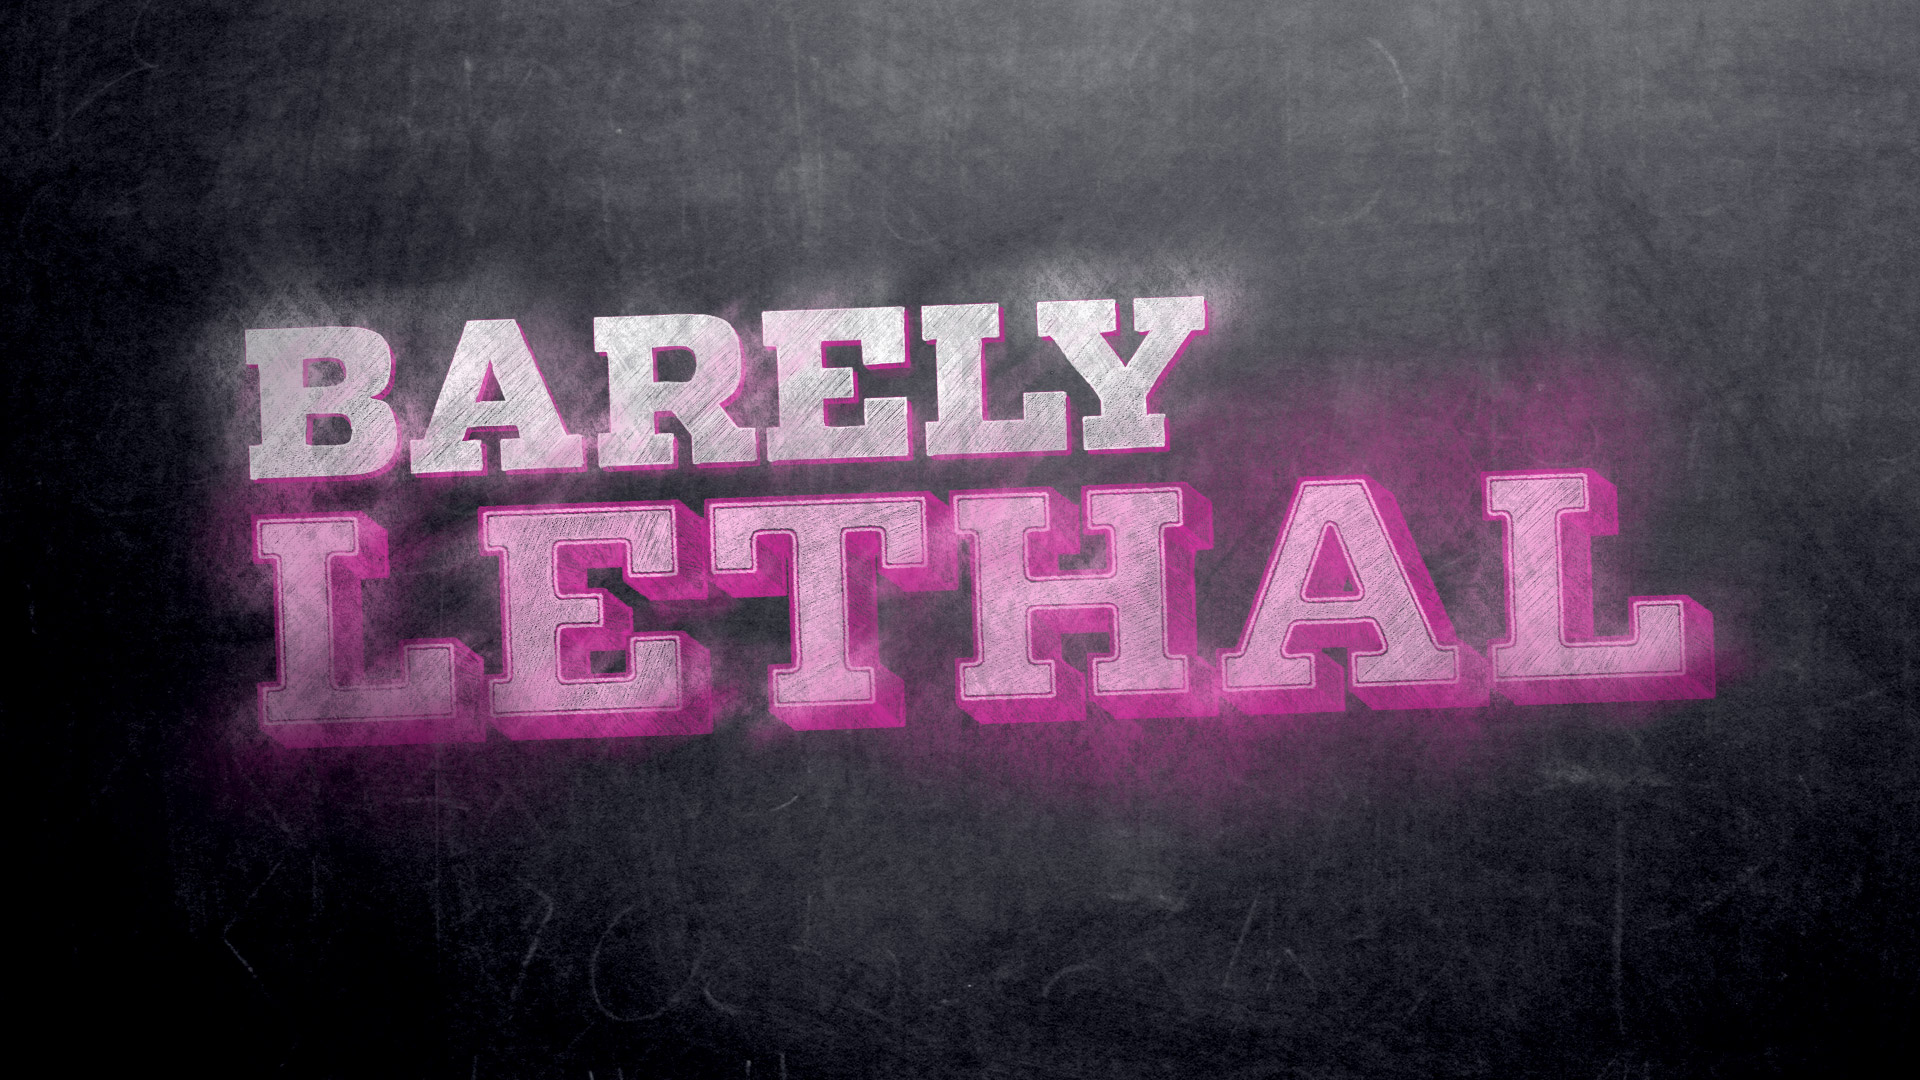 Movie Barely Lethal HD Wallpaper | Background Image